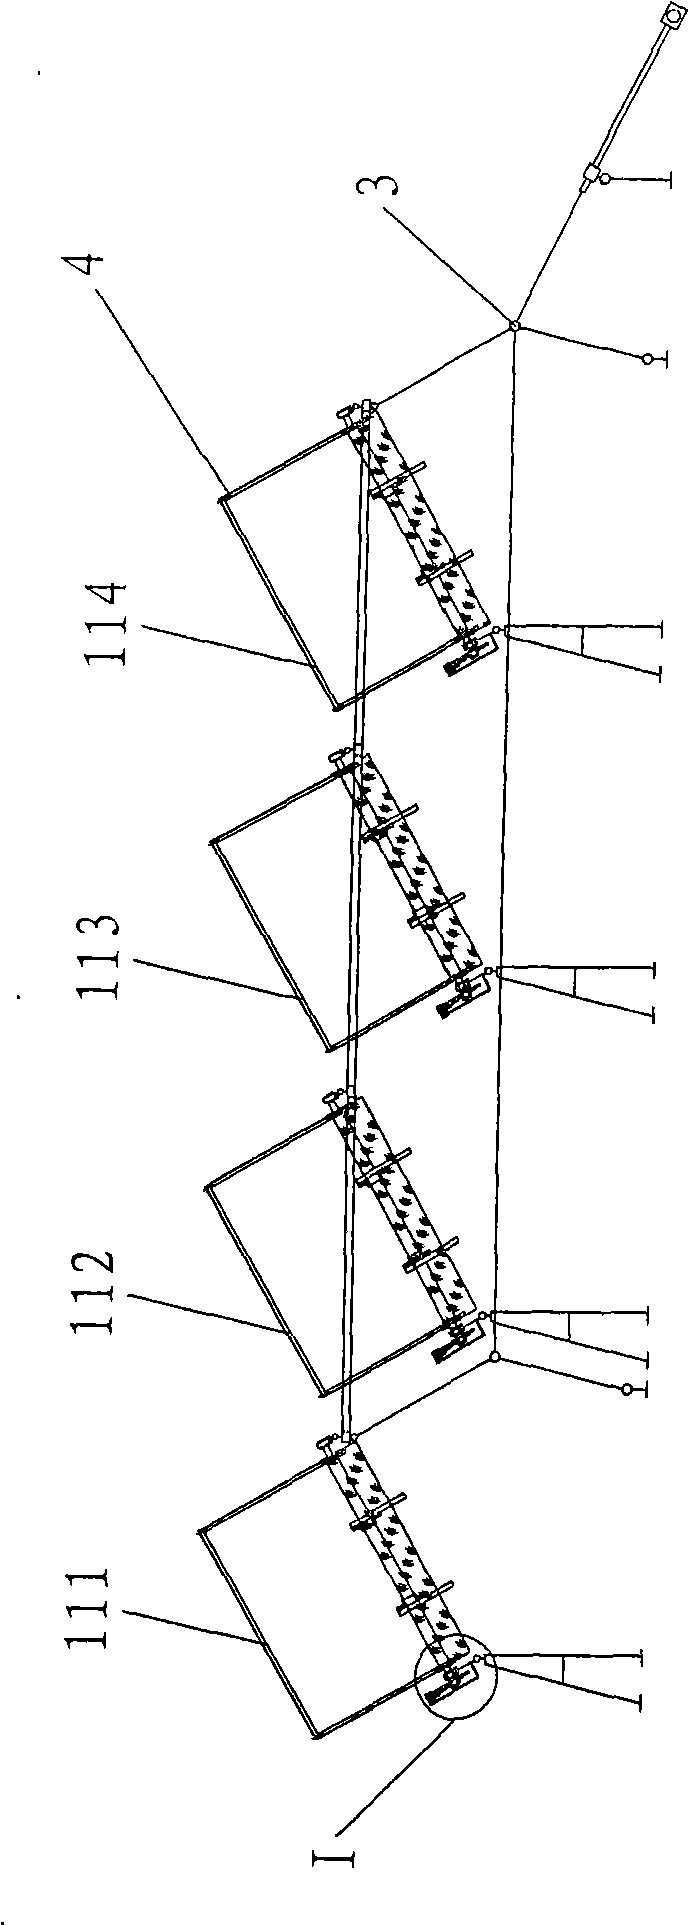 Autotracking link gear of solar concentrating photovoltaic power generation array